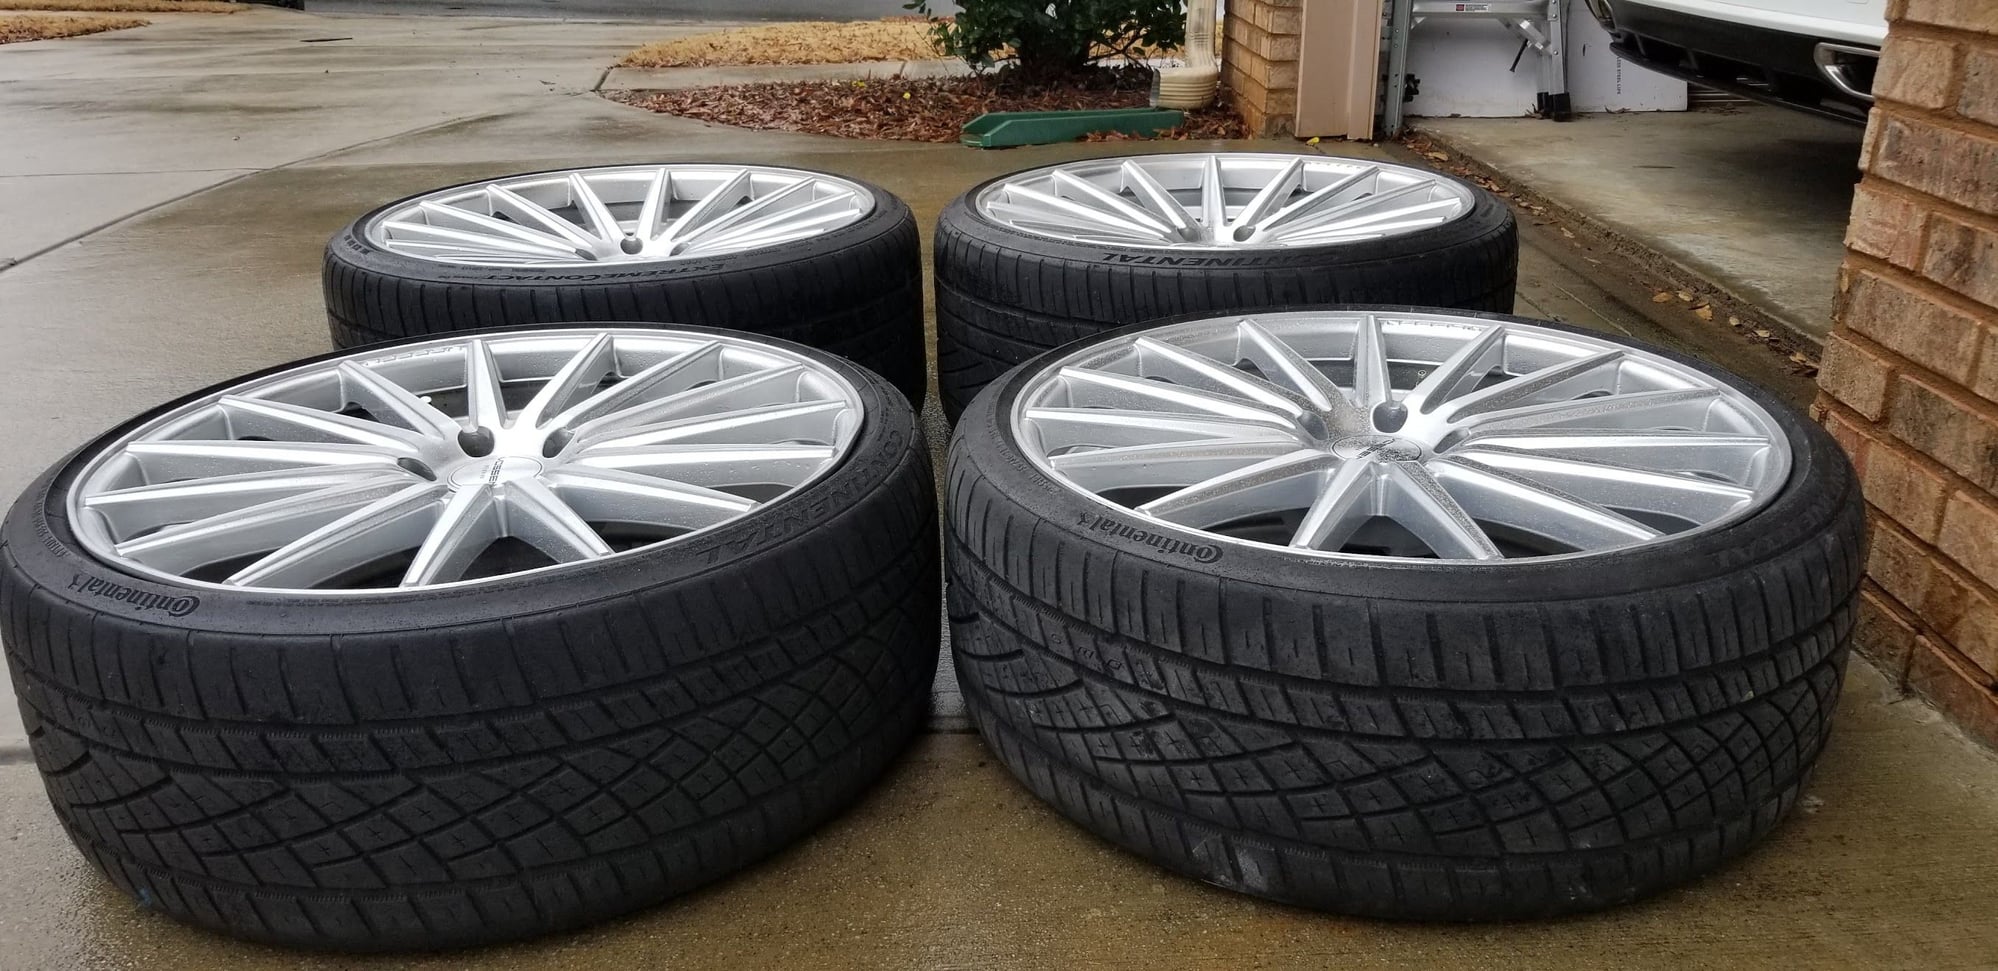 Wheels and Tires/Axles - FOR SALE: Set of 4 22 inch Vossen VFS2 Staggered wheels and tires - Used - Atlanta, GA 30317, United States